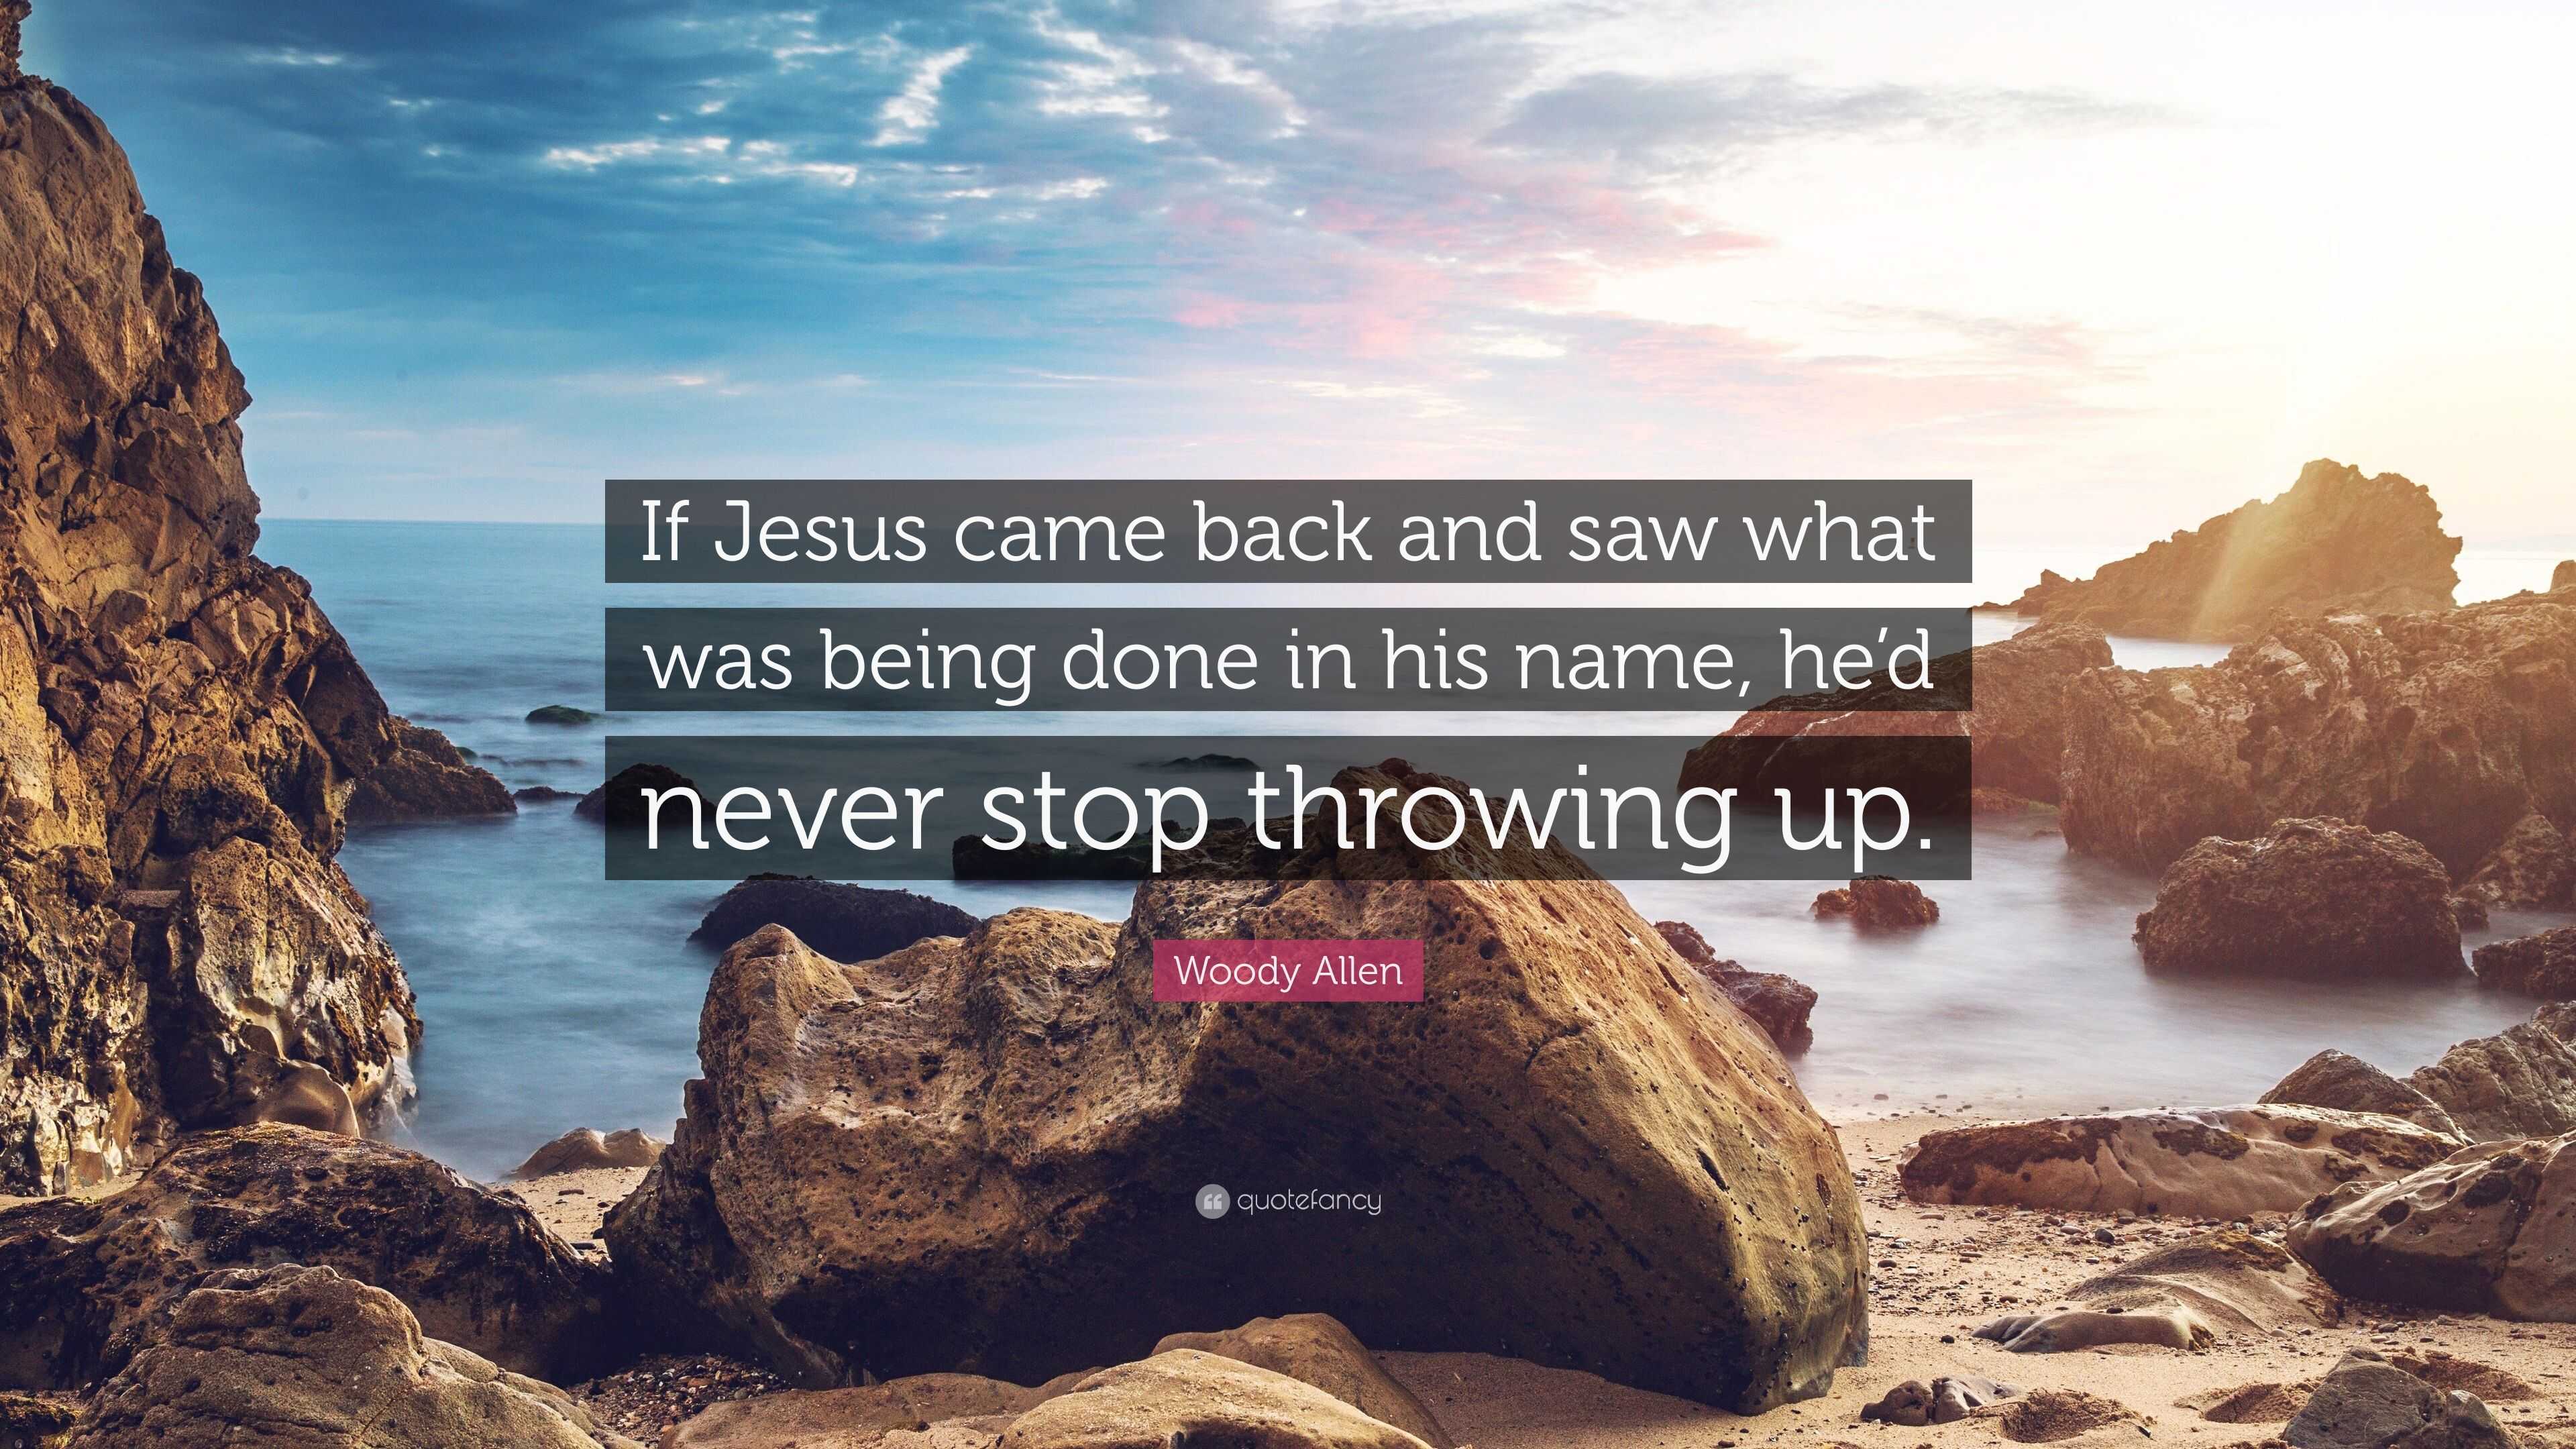 Woody Allen Quote: “If Jesus came back and saw what was being done in ...